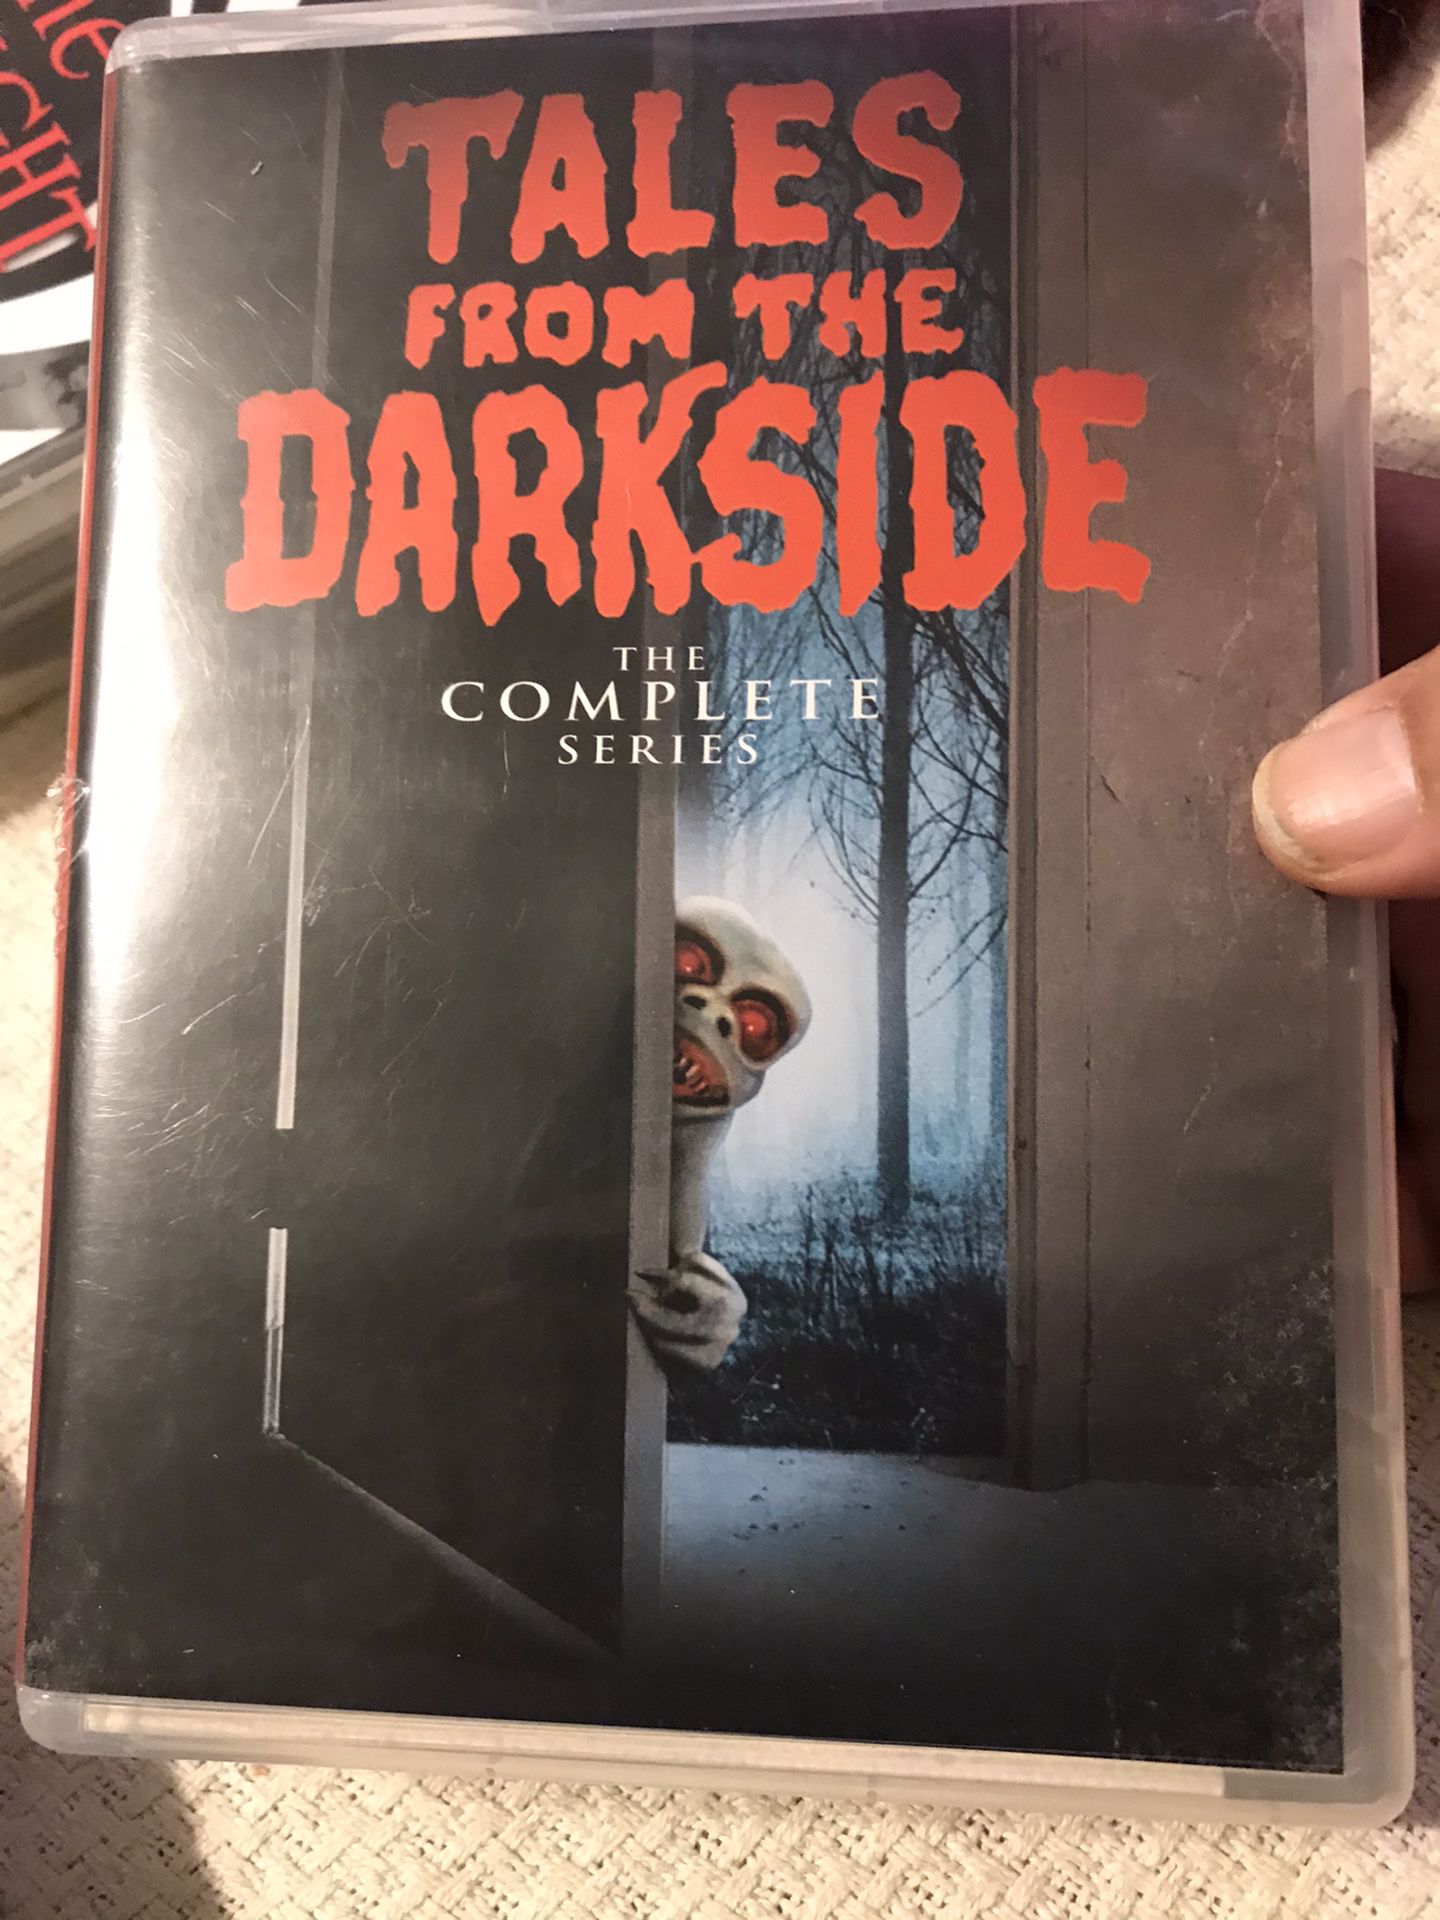 Tales from the Darkside (the complete series)